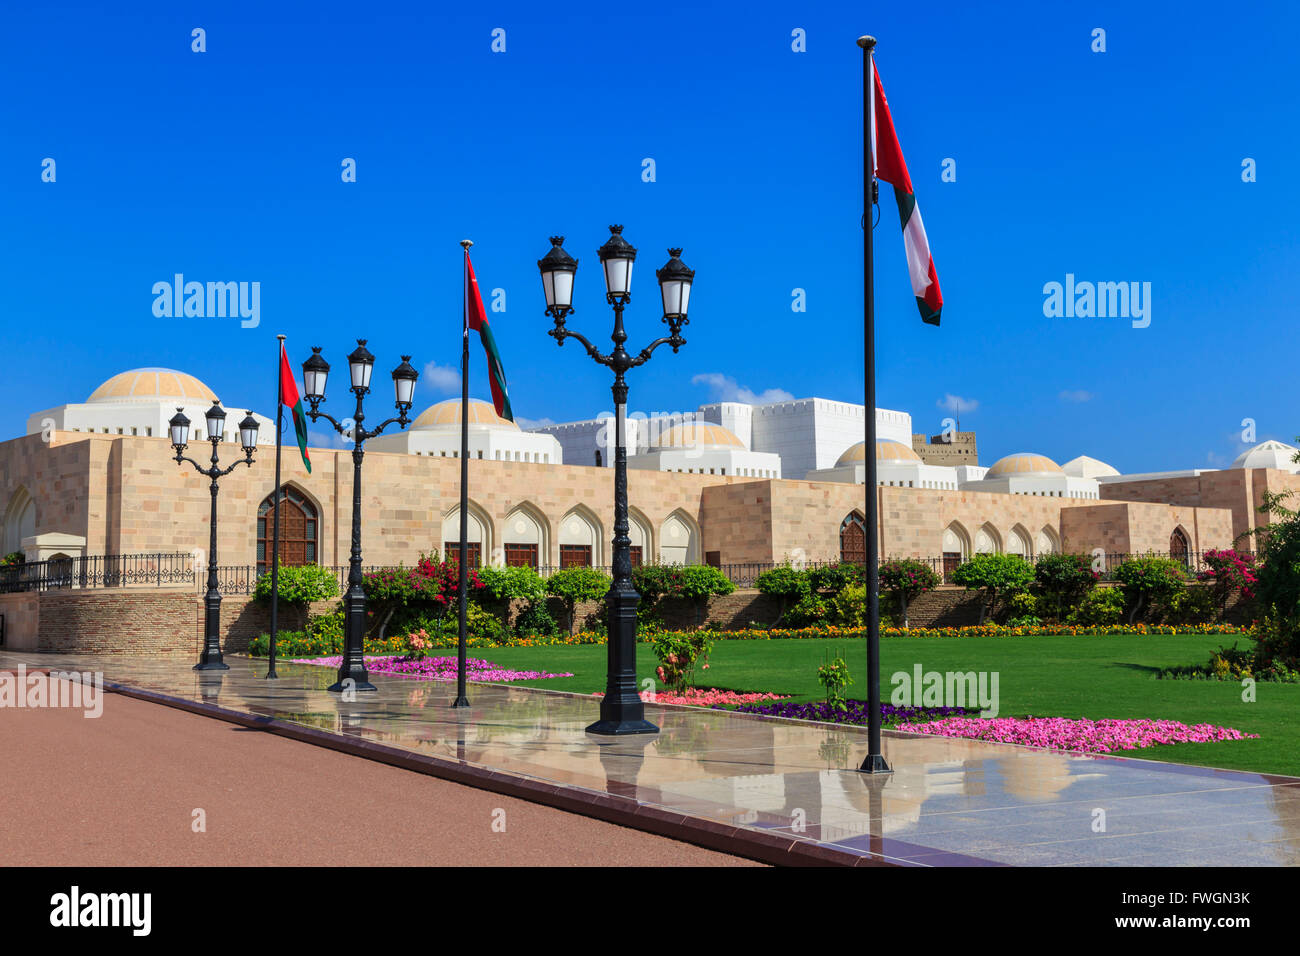 Polished pavements, National Flags, lush lawns and flowers in bloom, Sultan's Palace, Old Muscat, Oman, Middle East Stock Photo